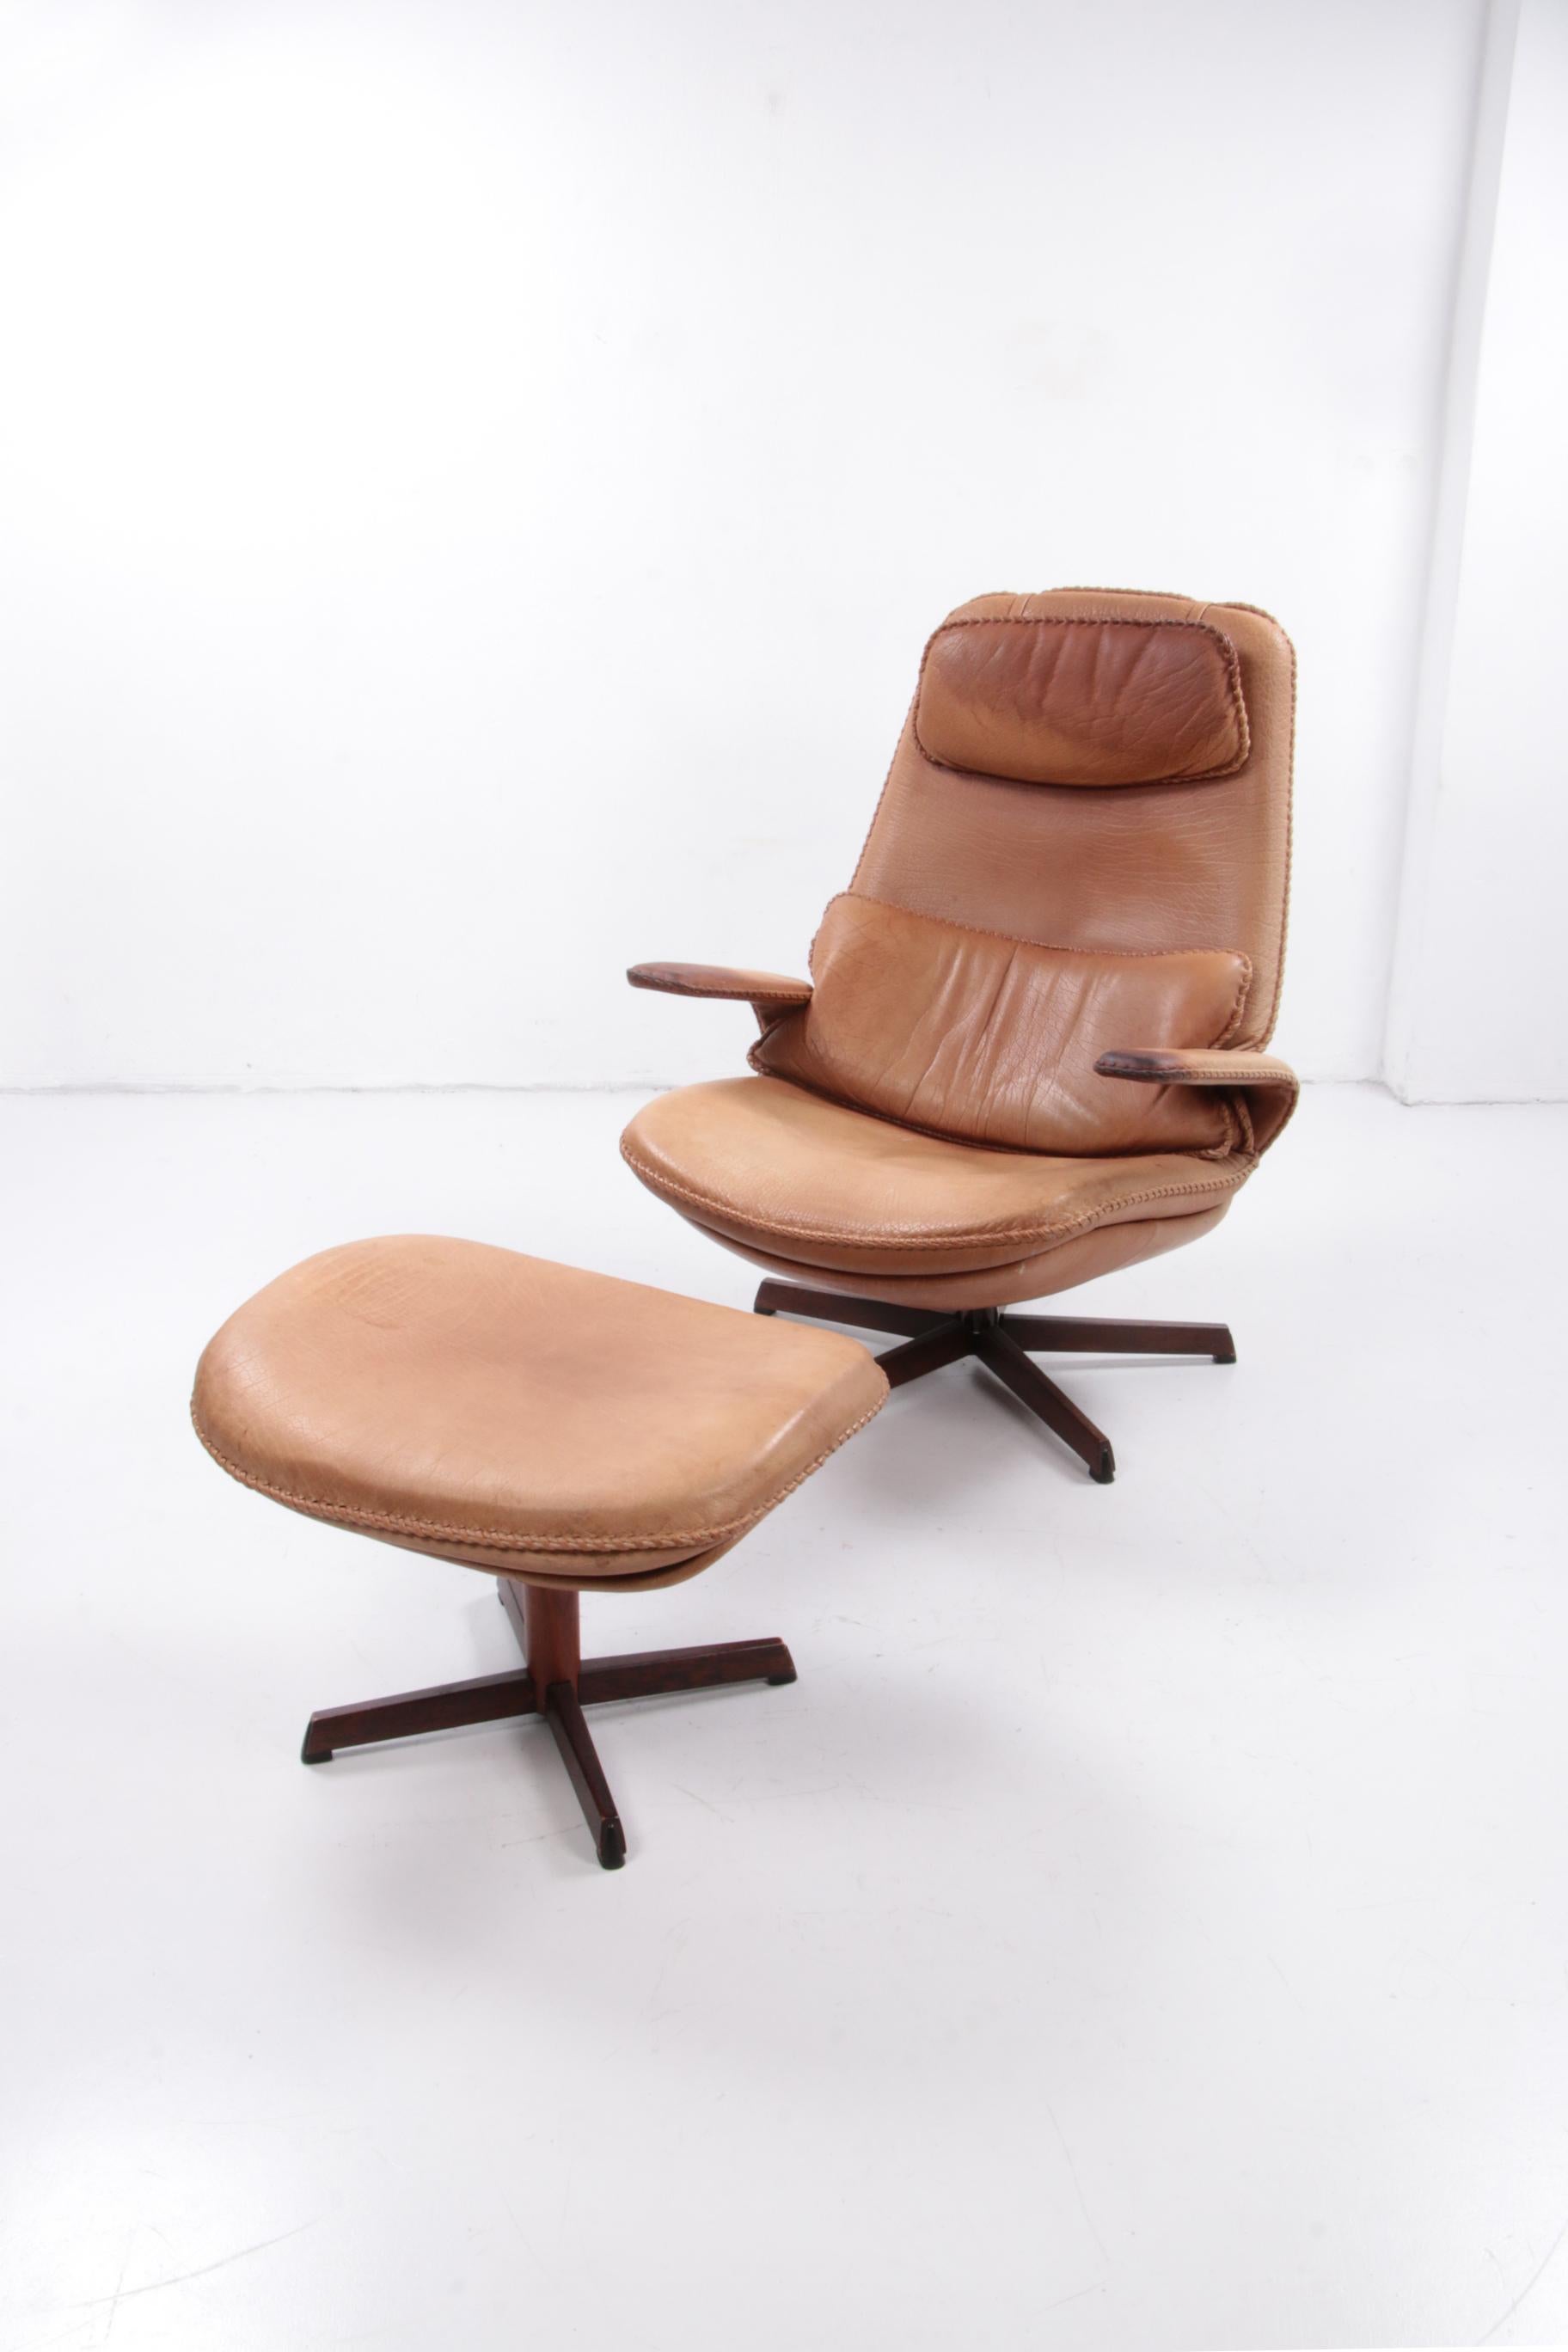 Danish Buffalo leather adjustable armchair & ottoman set by M&S Mobler, 1960s Denmark.
This vintage armchair and ottoman were produced in Denmark in the 1960s by M&S Mobler. Madsen & Schubell are designers and worked at M&S Mobler. These were